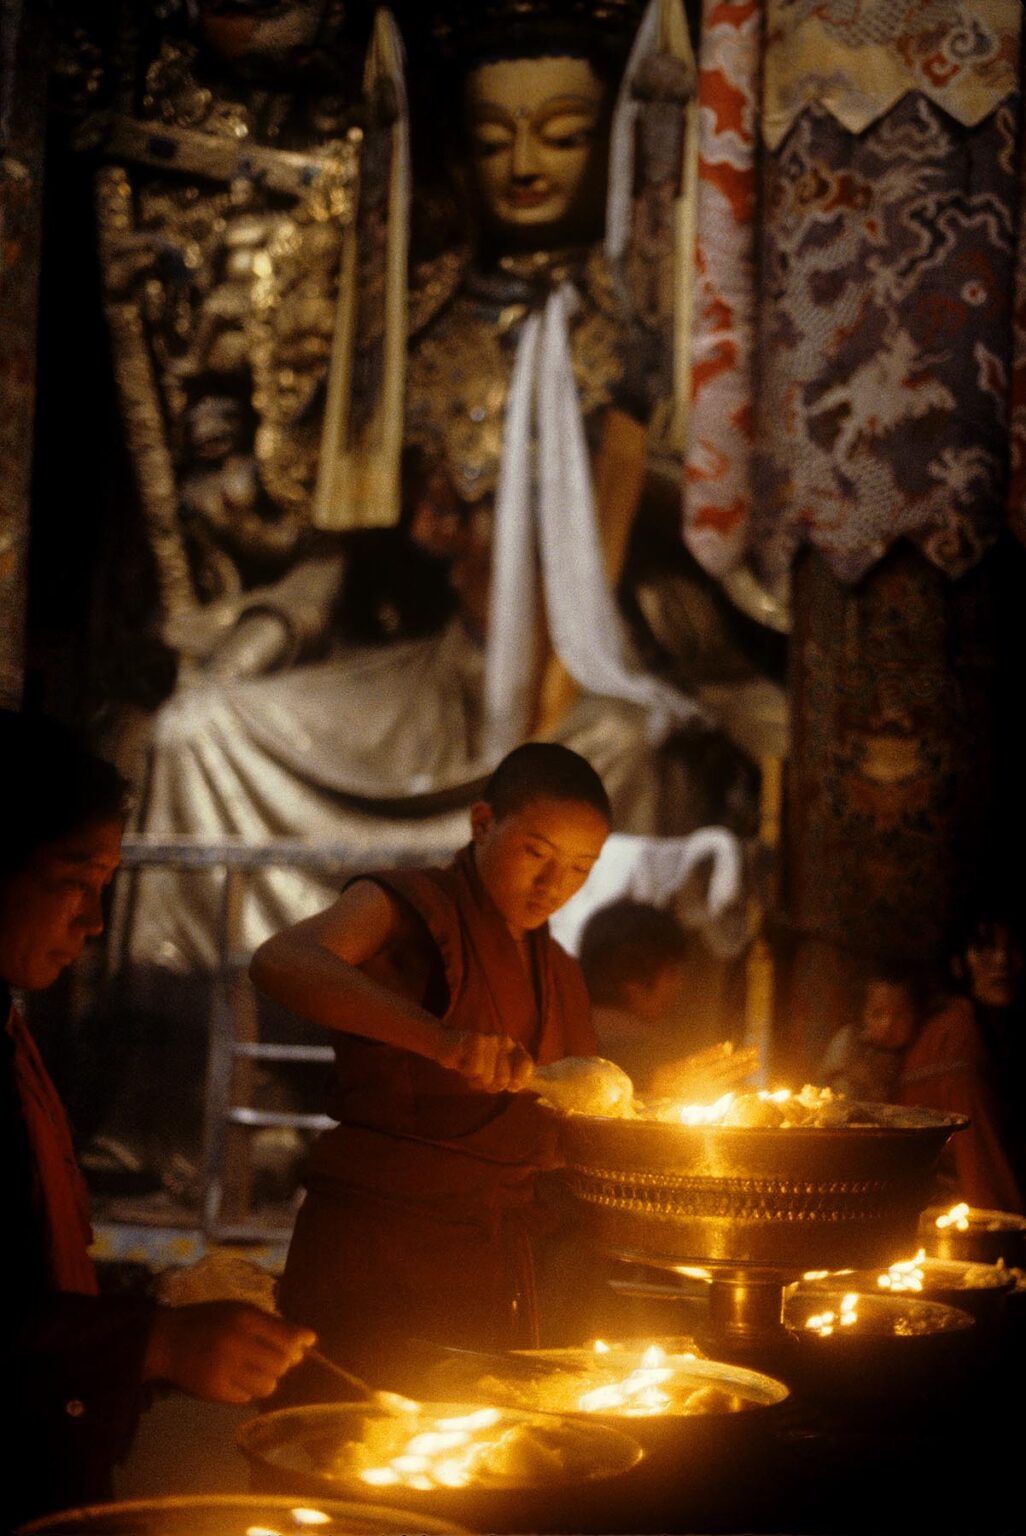 A MONK lights butter lamps in the JOKHANG, TIBET'S holiest temple, built by KING SONGTSEN GAMPO in the 7th Century - LHASA, TIBET